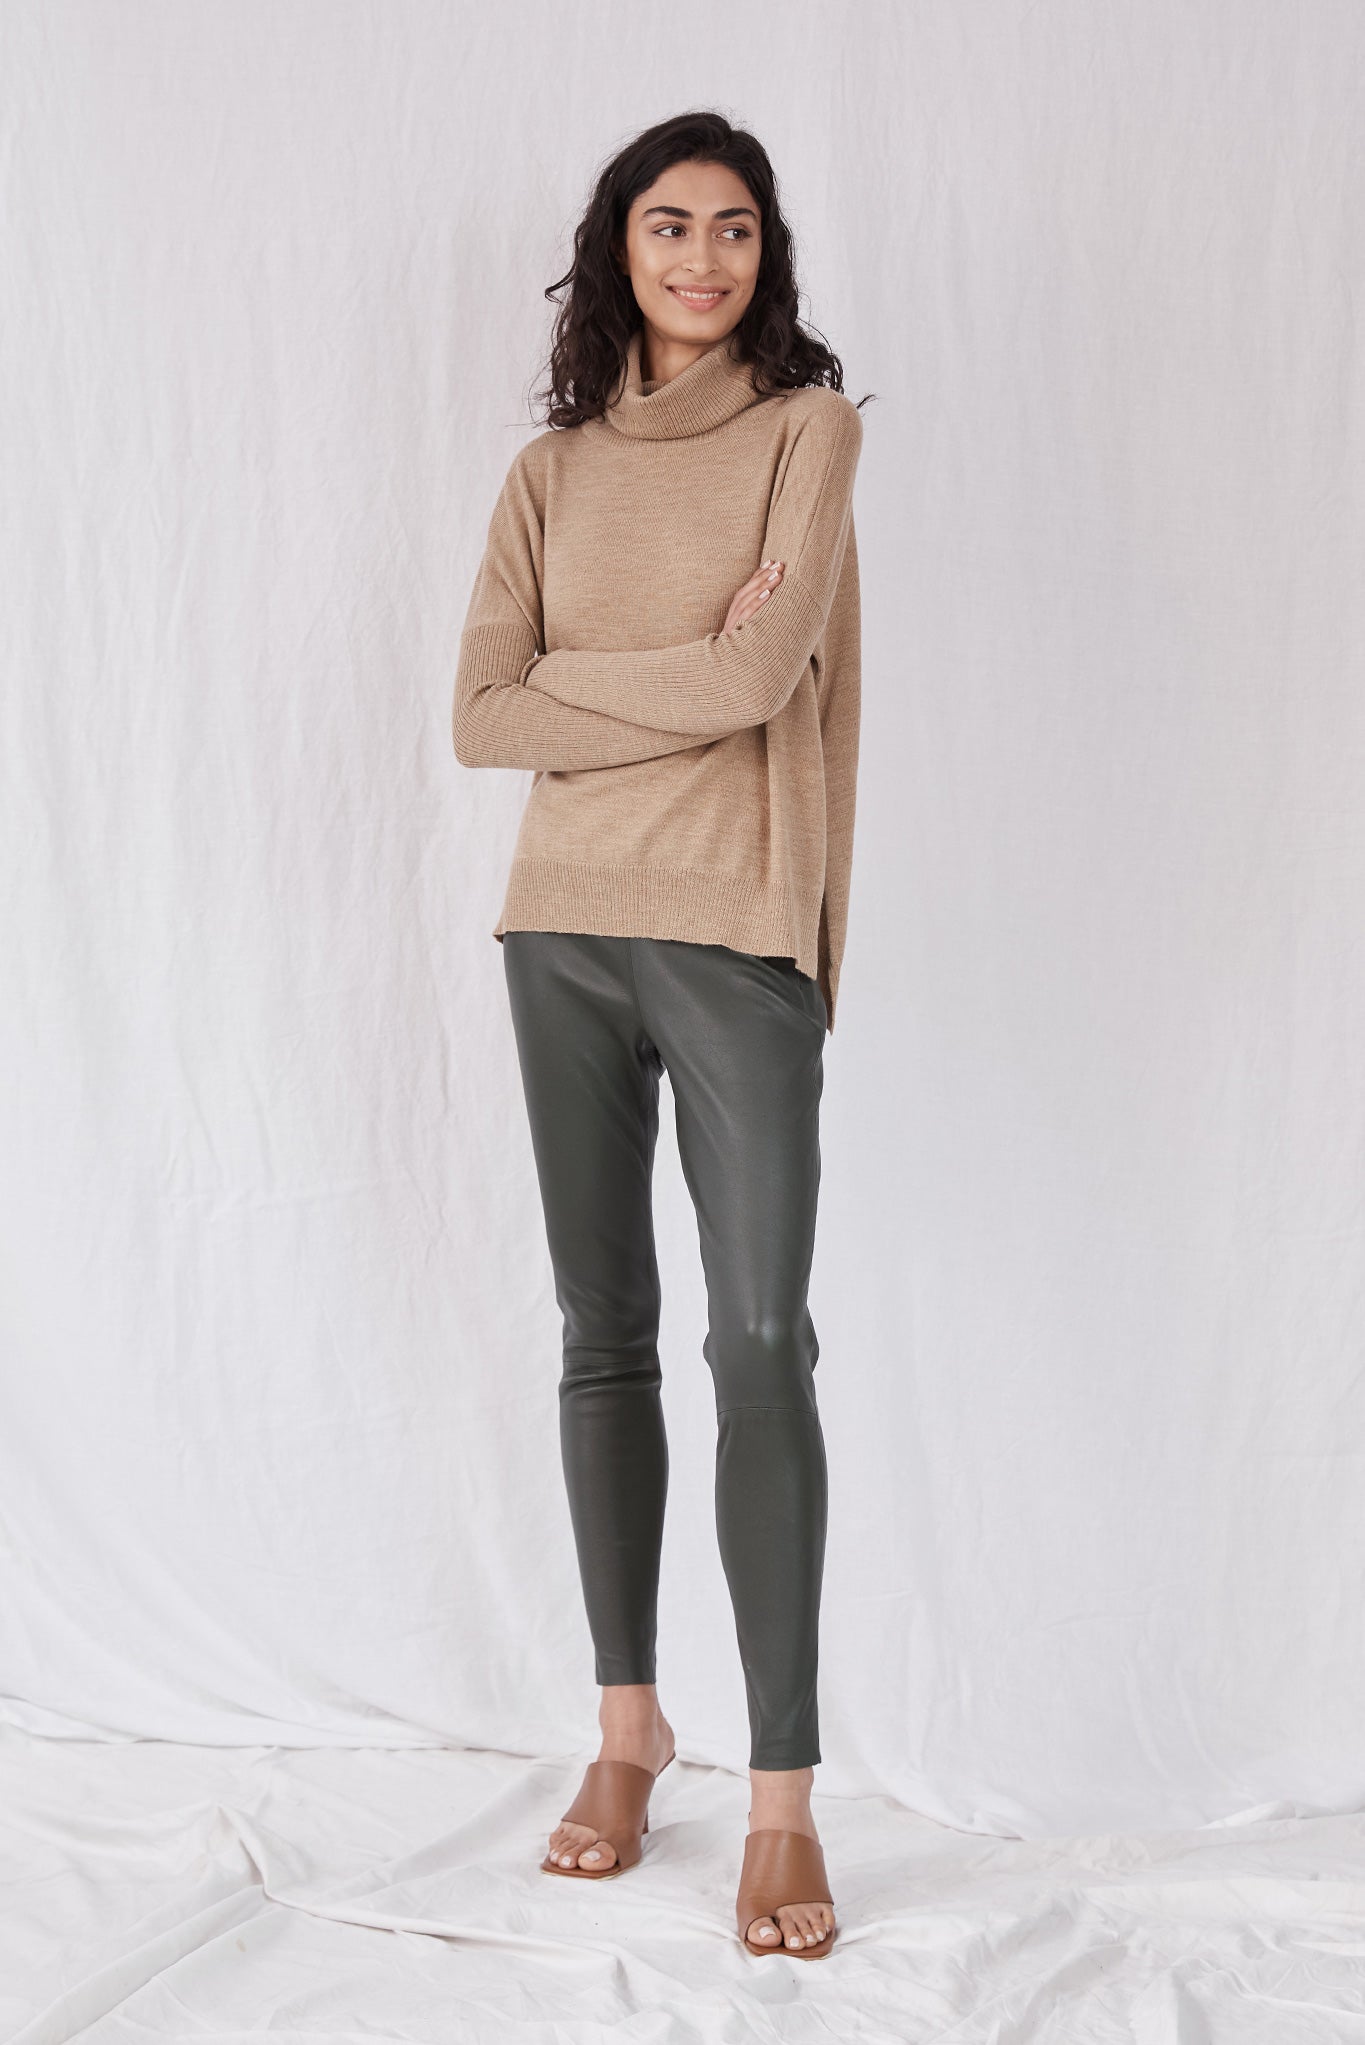 The West Broadway Sleek Olive Green Ladies Leather Pants Made By West14th.  Made From 100% Genuine Soft Lamb Leather. For all seasons, Quality To Last  A Lifetime. Wardrobe Staples